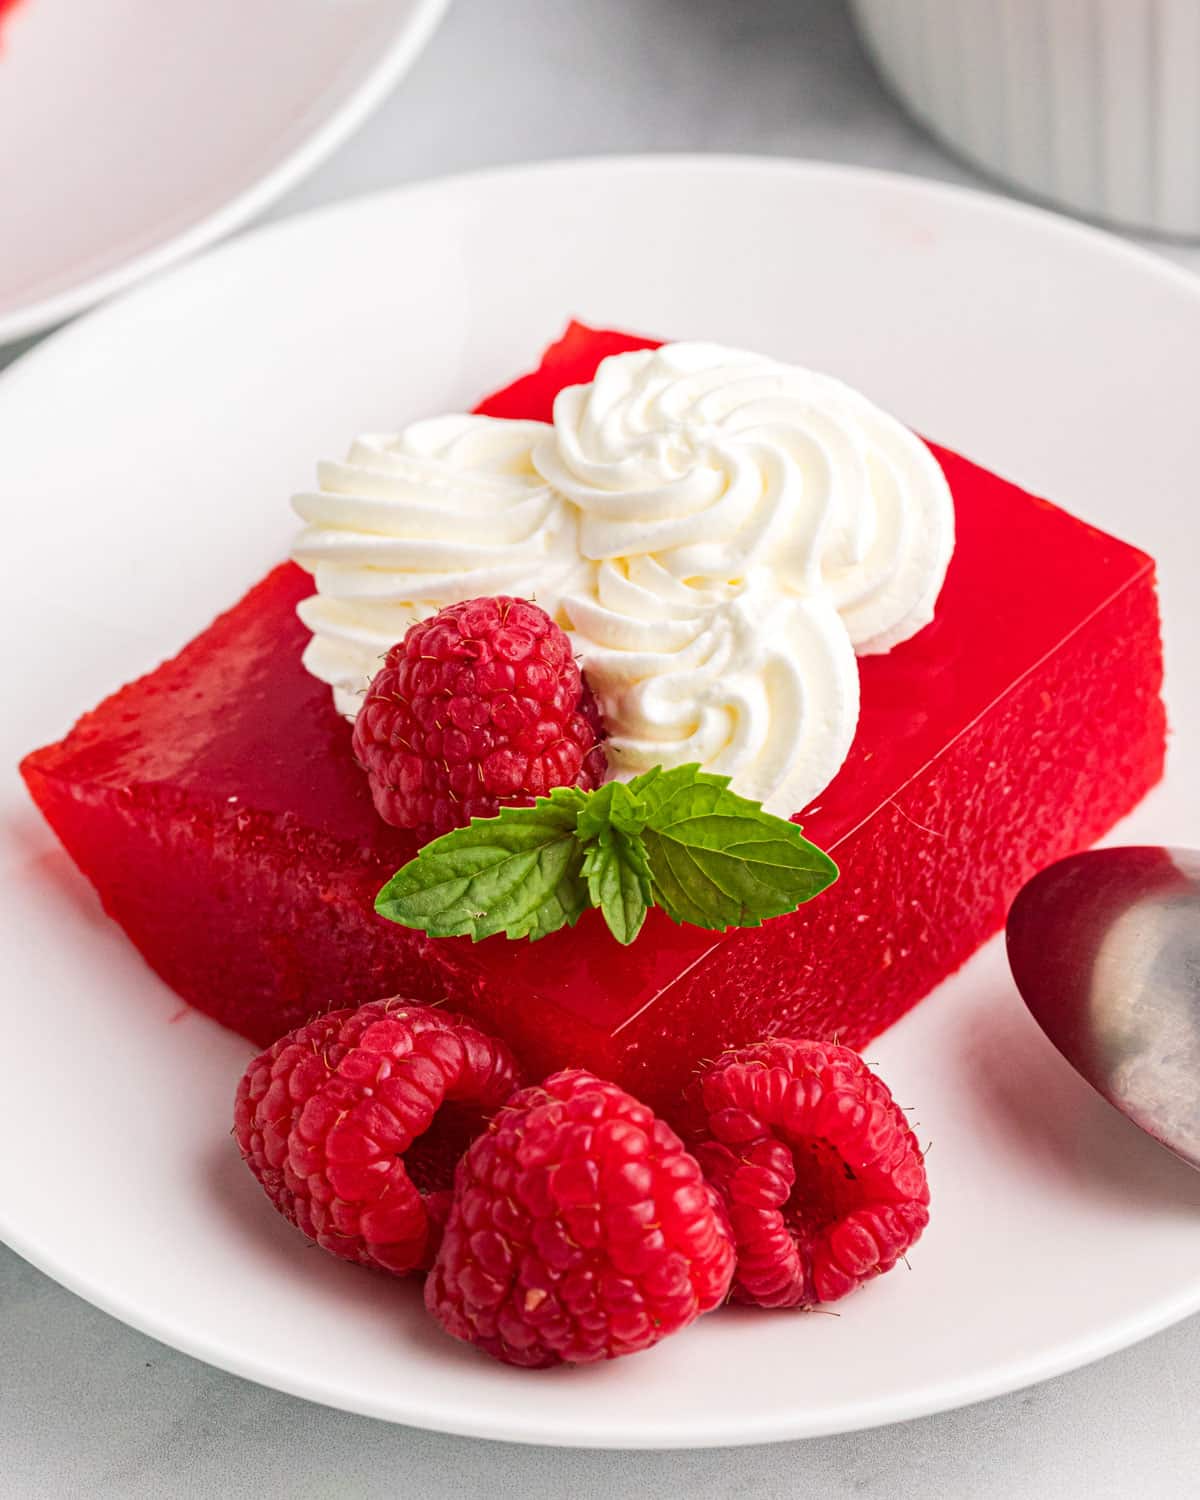 applesauce jello on a plate with whipped cream, fresh raspberries and mint